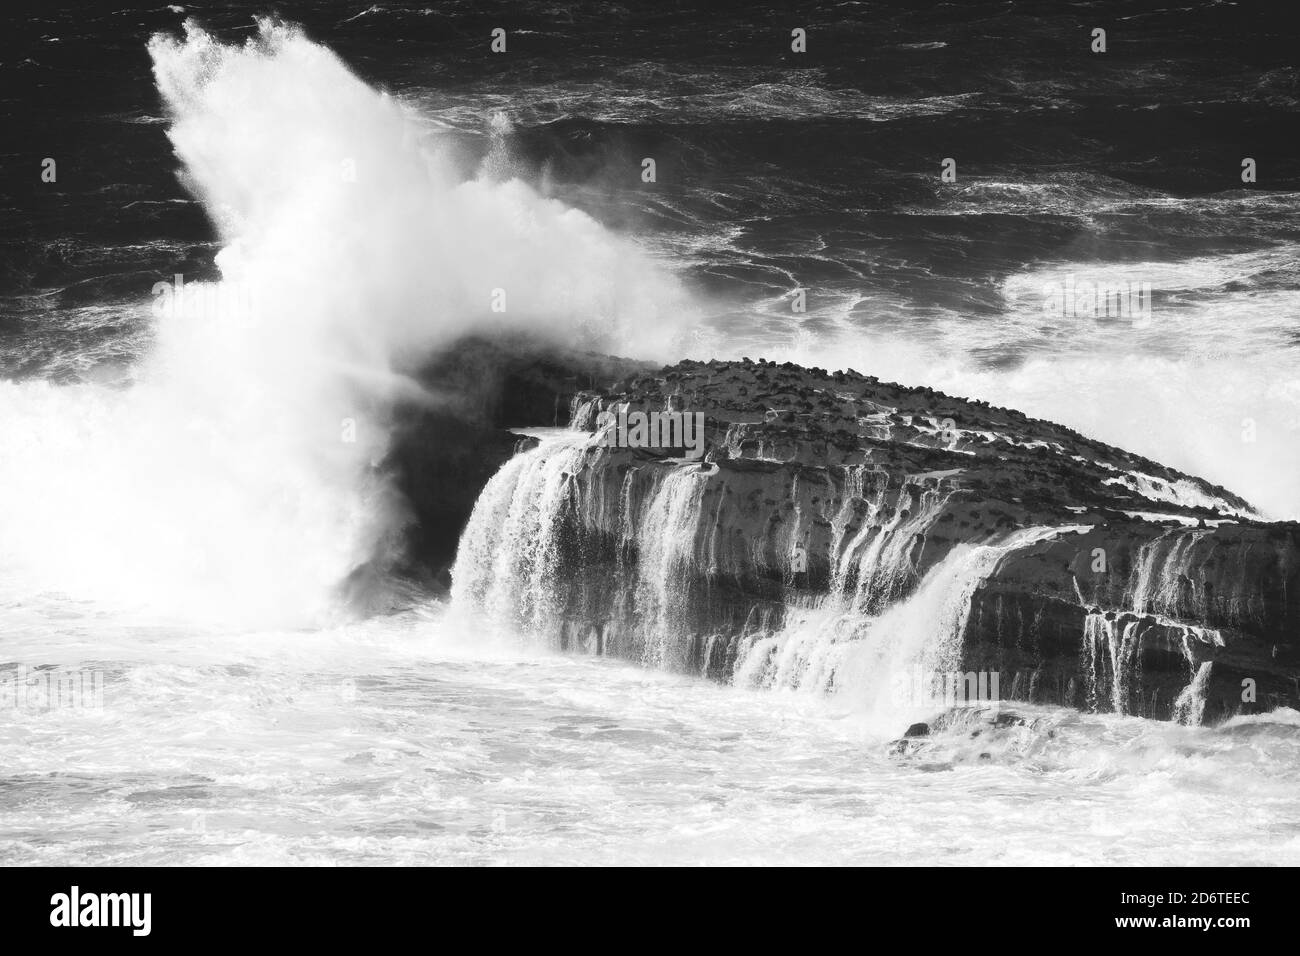 Sea storm with really big waves hitting the coast of Biarritz, at the Basque Country. Stock Photo